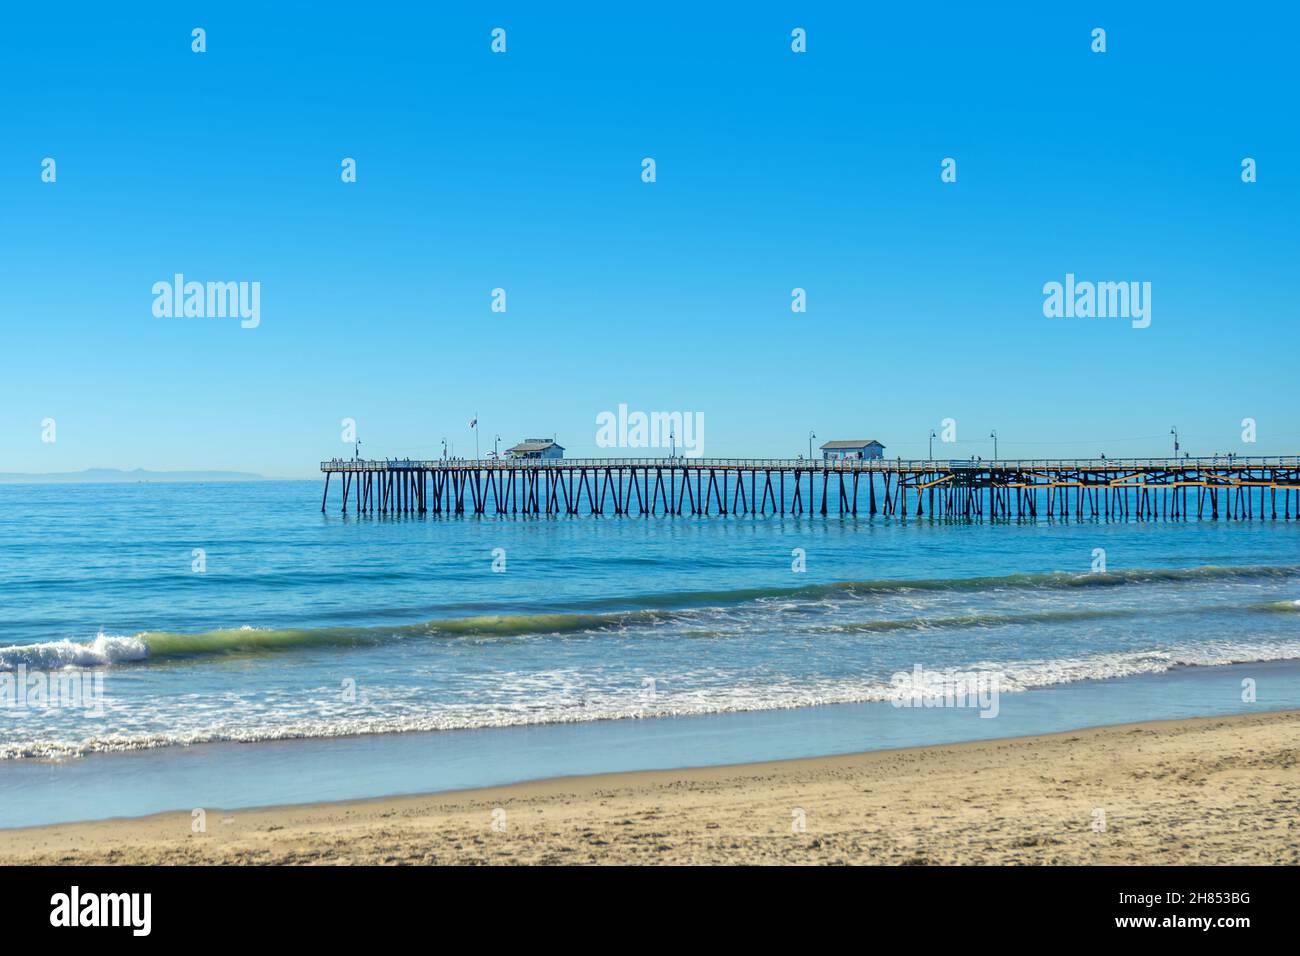 Beach and pier at San Clemente, California Stock Photo